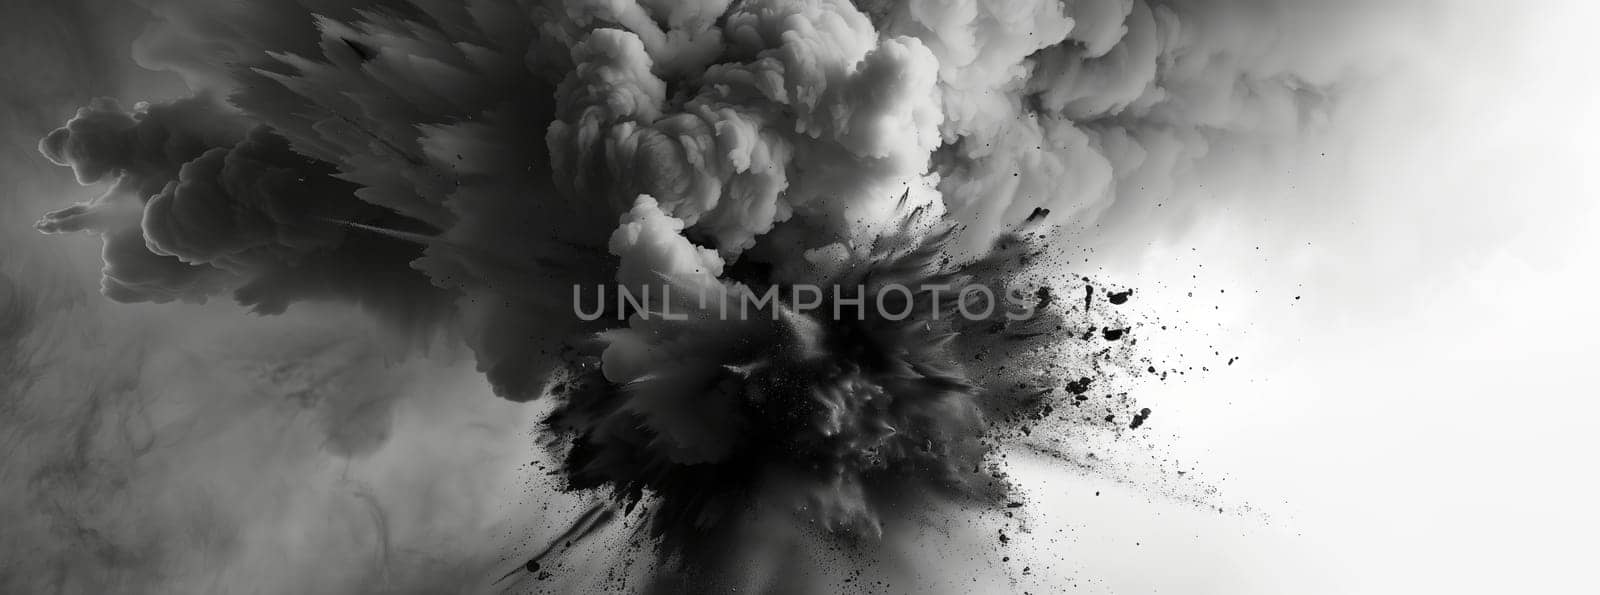 Monochrome image of volcanic smoke rising in a natural landscape by richwolf